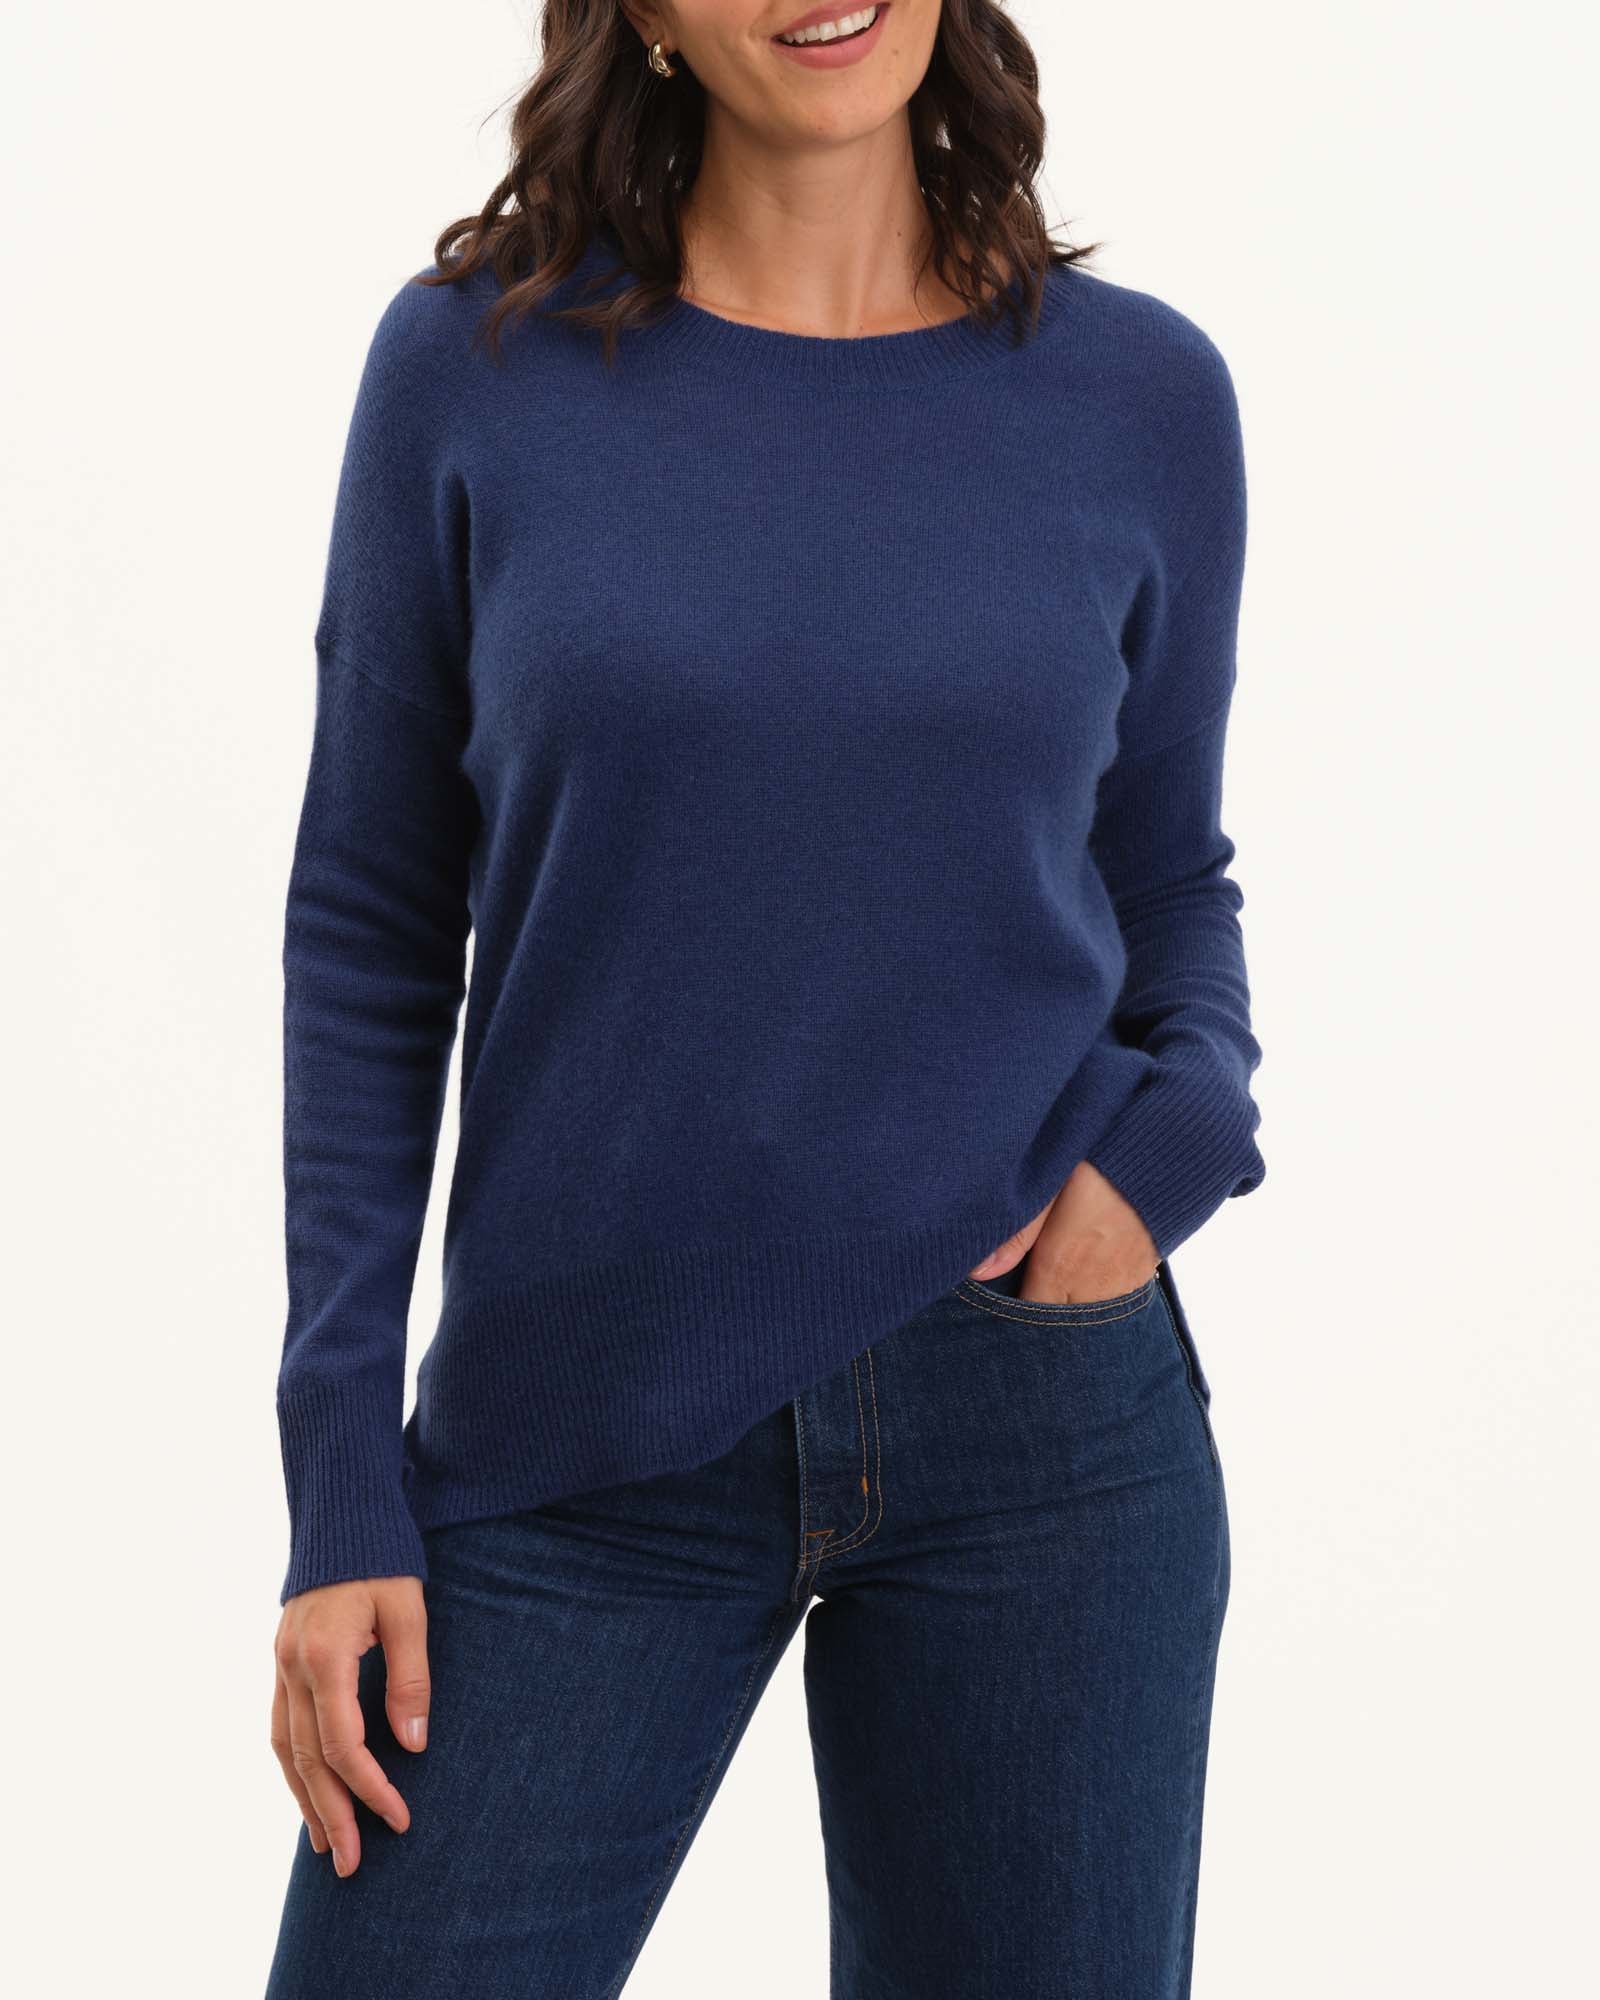 Our Classic Lightweight Cashmere Sweater